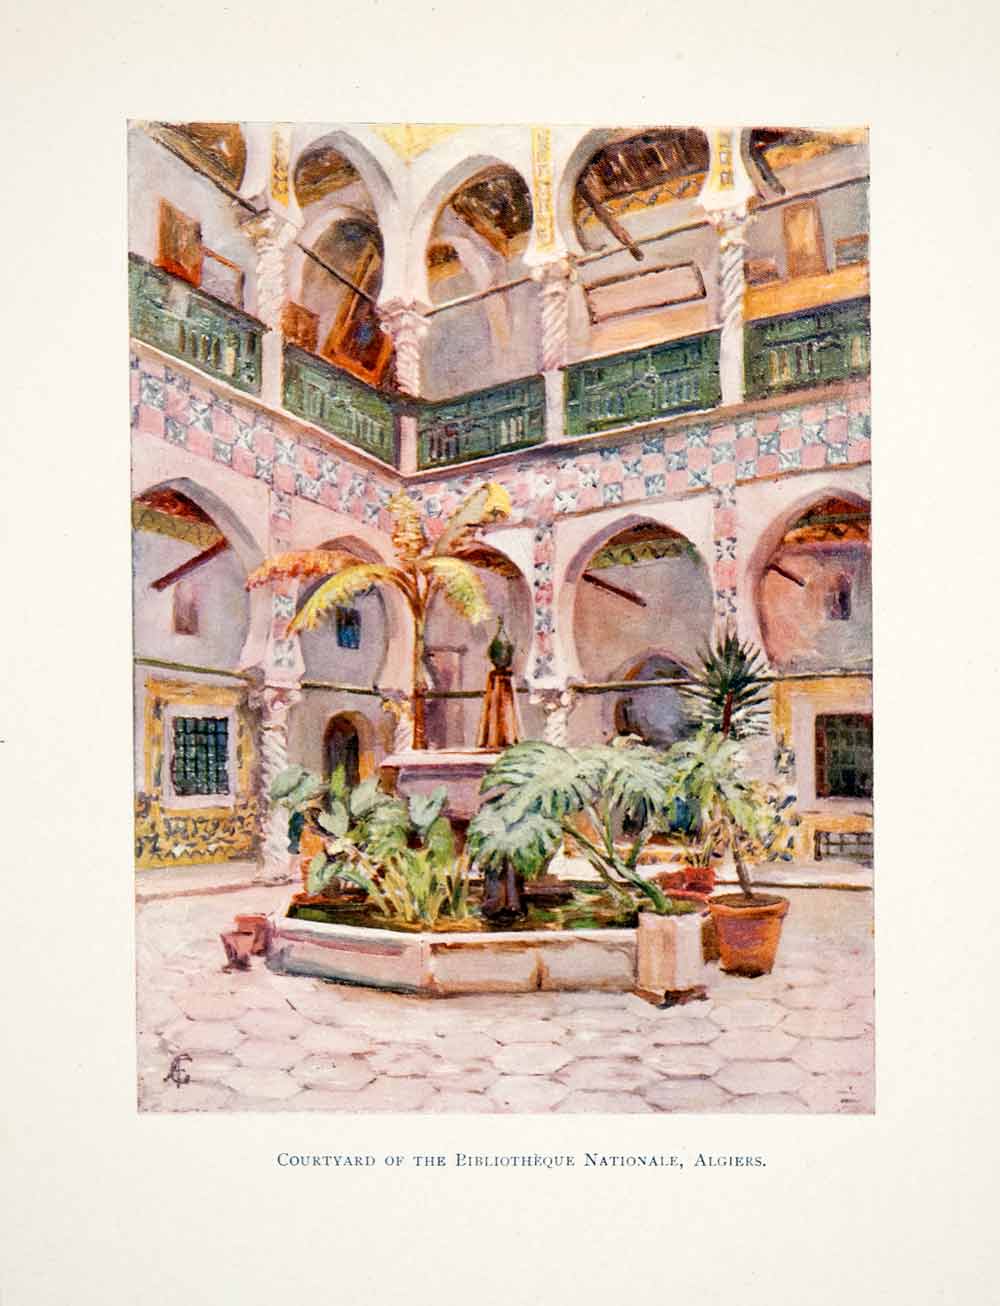 1905 Color Print Courtyard Bibliotheque Nationale Algiers Algeria Library XGJB6